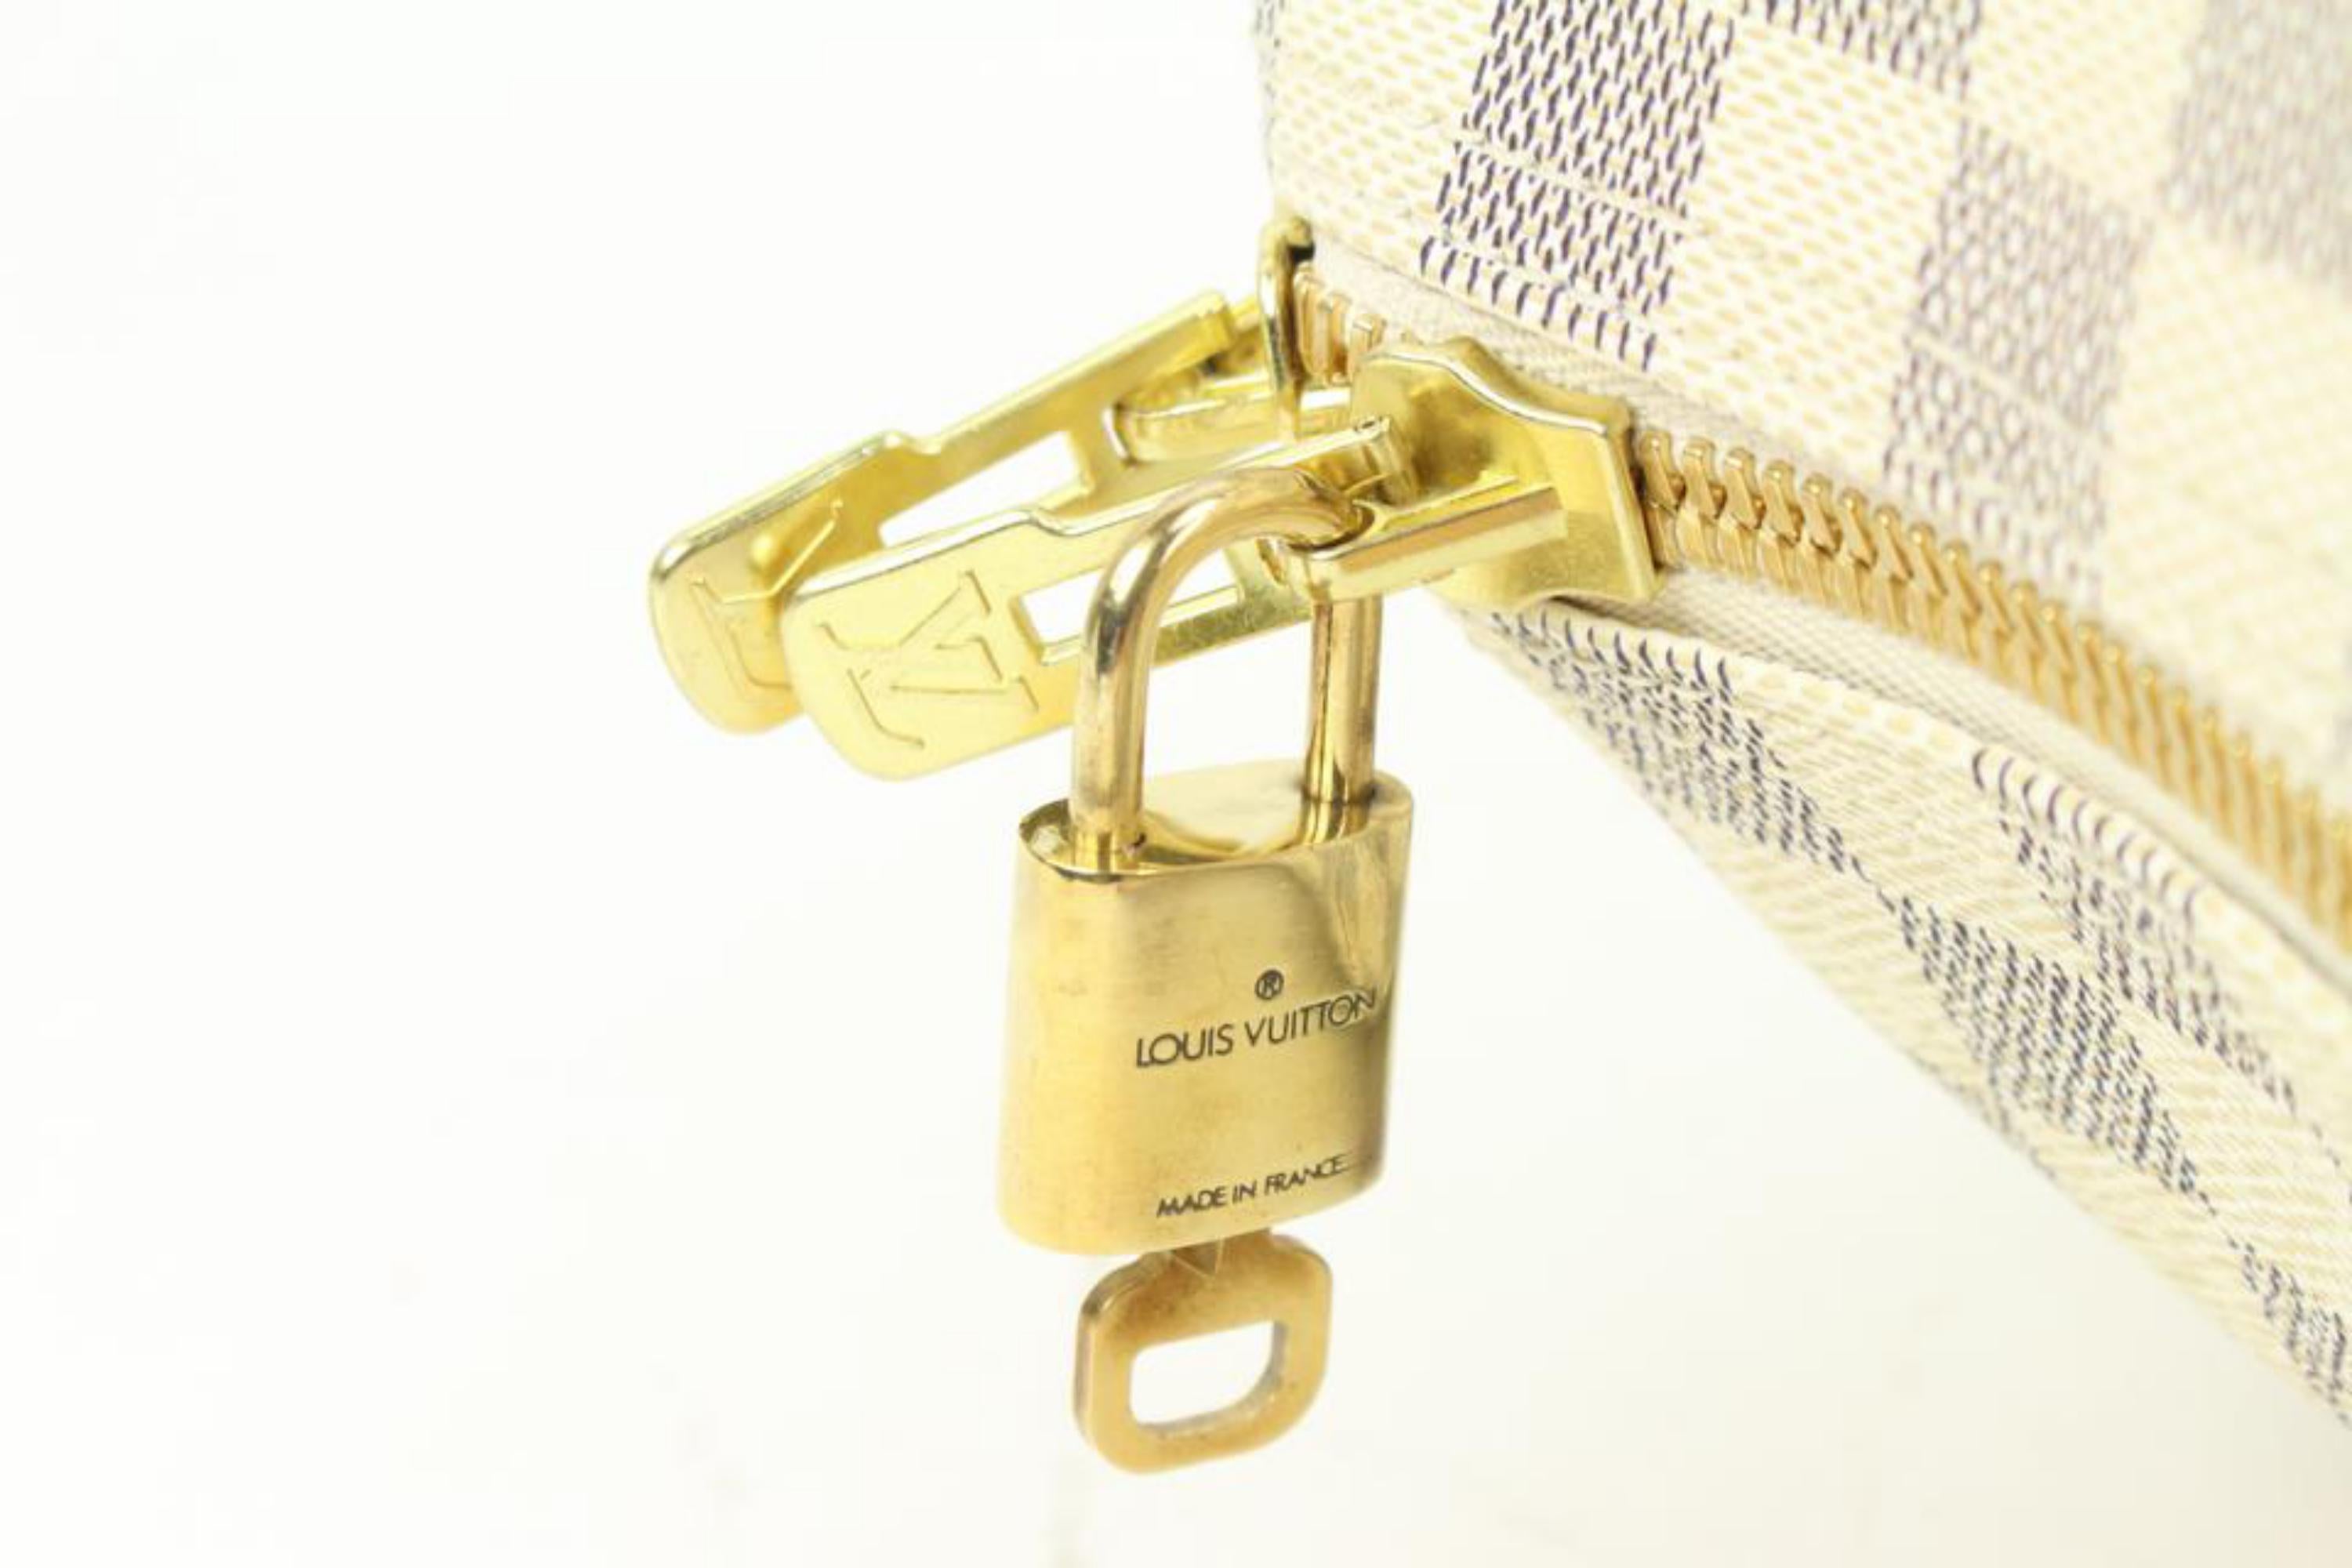 Louis Vuitton Damier Azur Keepall 50 Duffle Bag 48LZ61 In Good Condition For Sale In Dix hills, NY